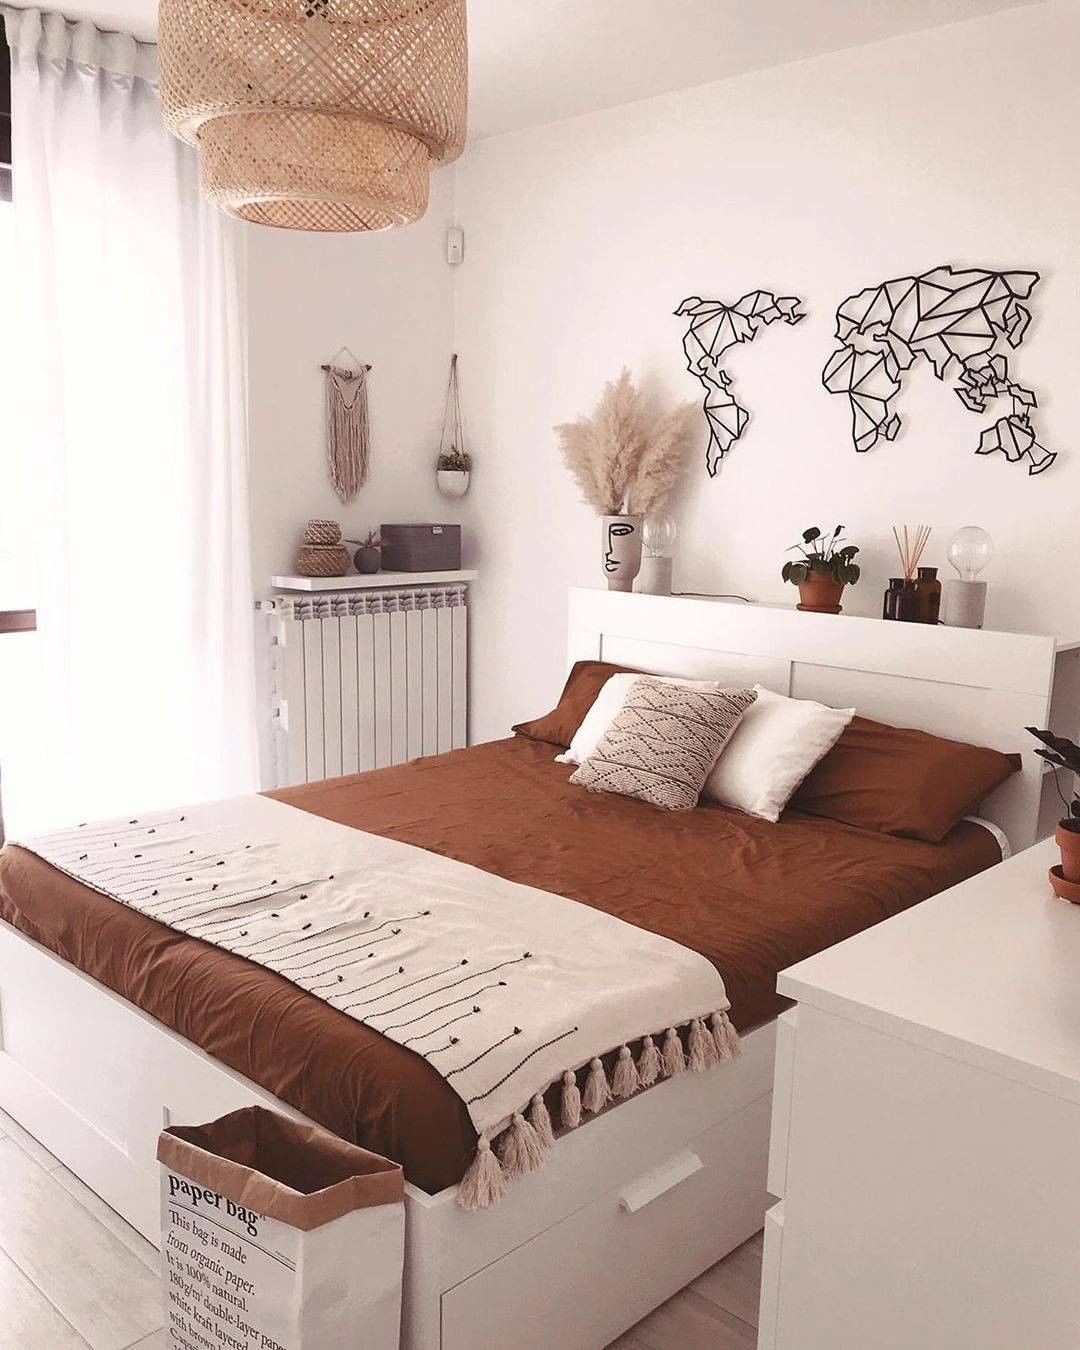 Design A Calm & Comfortable Room To Promote An Excellent Nights Sleep